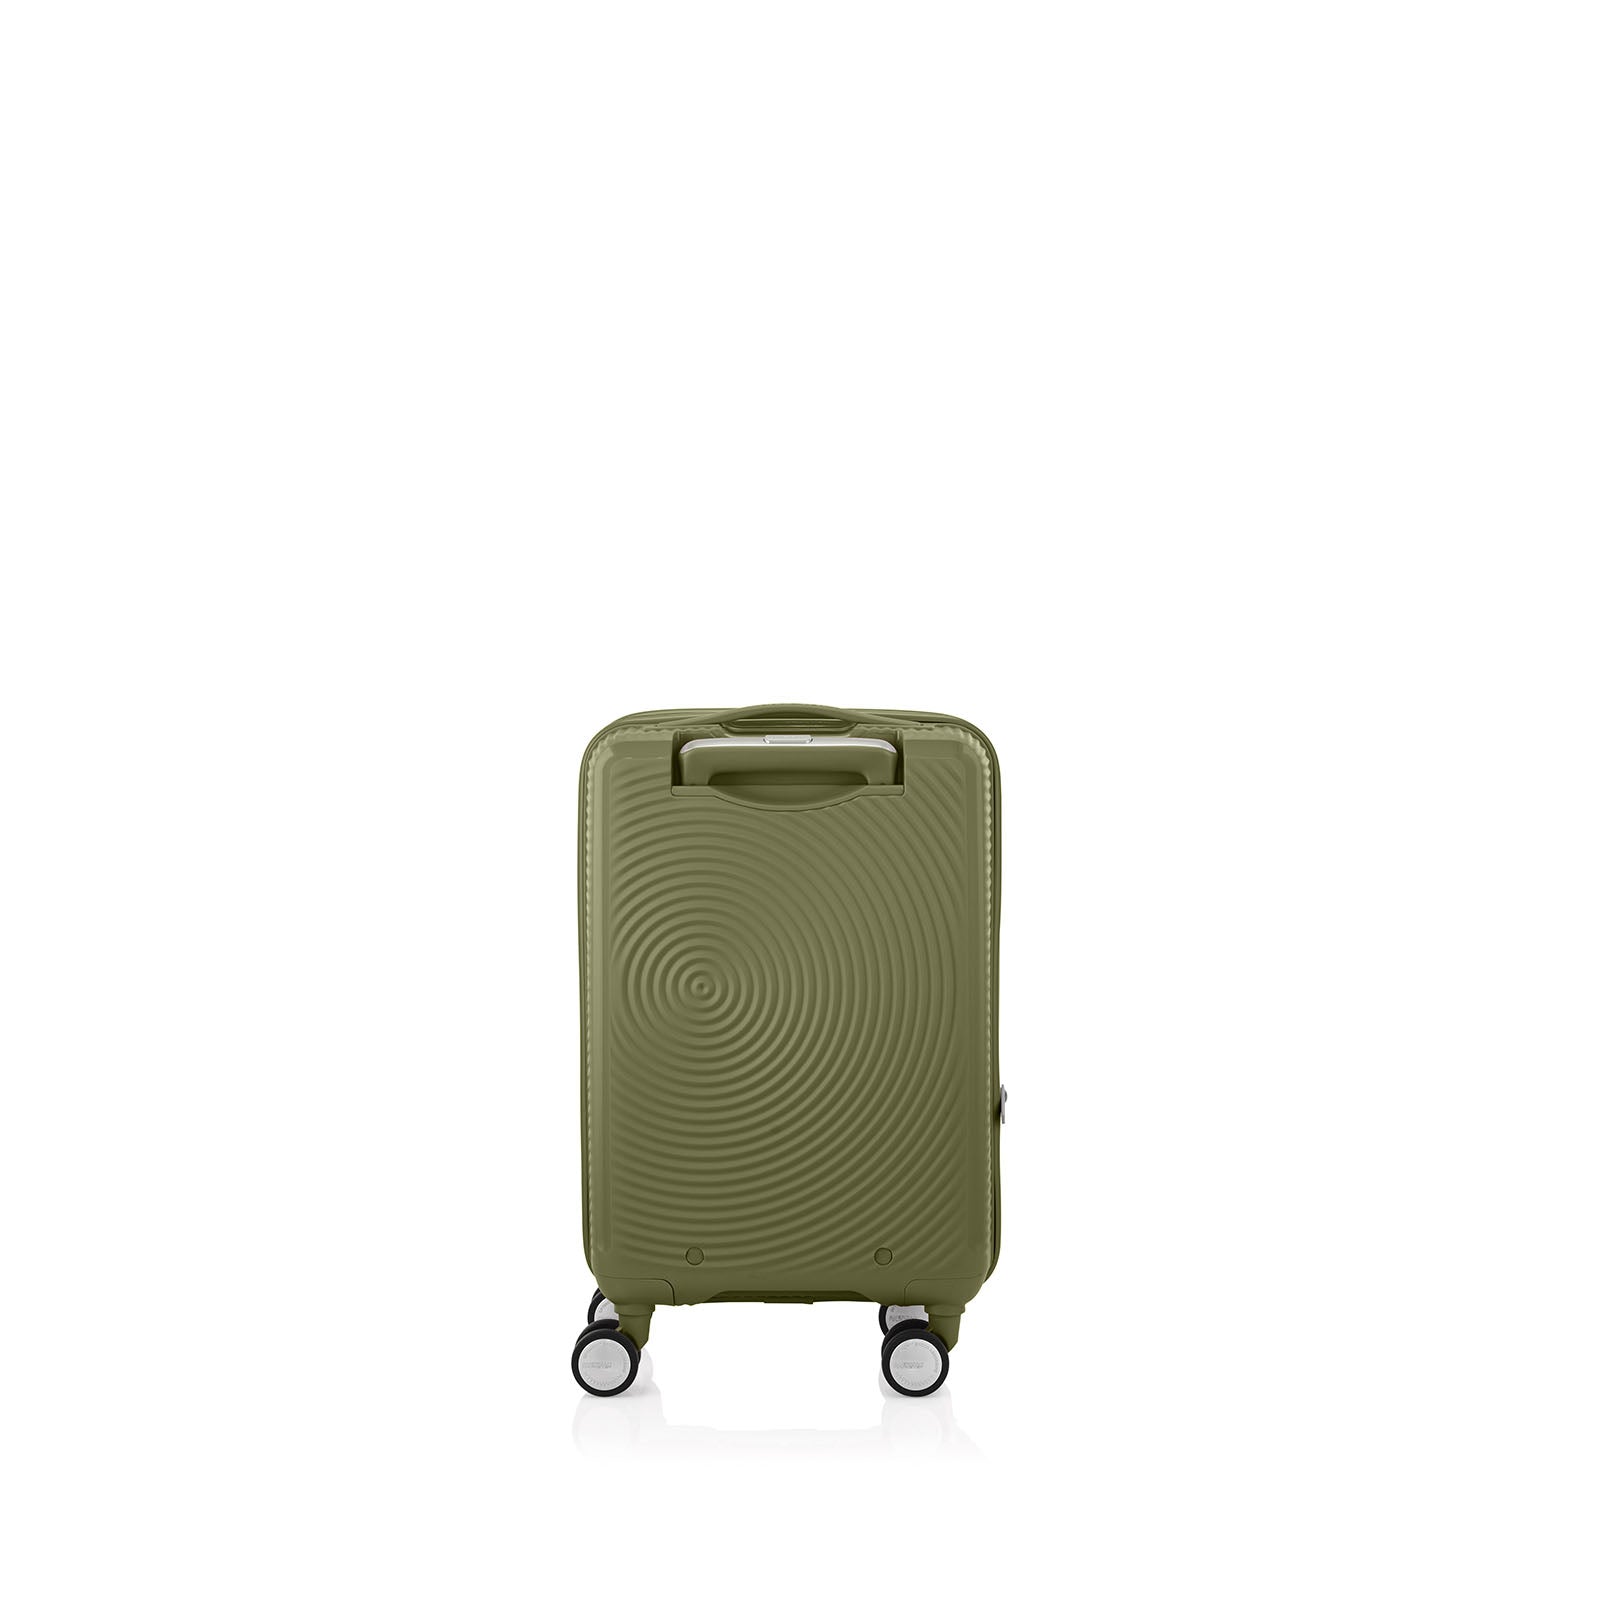 American-Tourister-Curio-Book-Opening-55cm-Carry-On-Suitcase-Khaki-Back